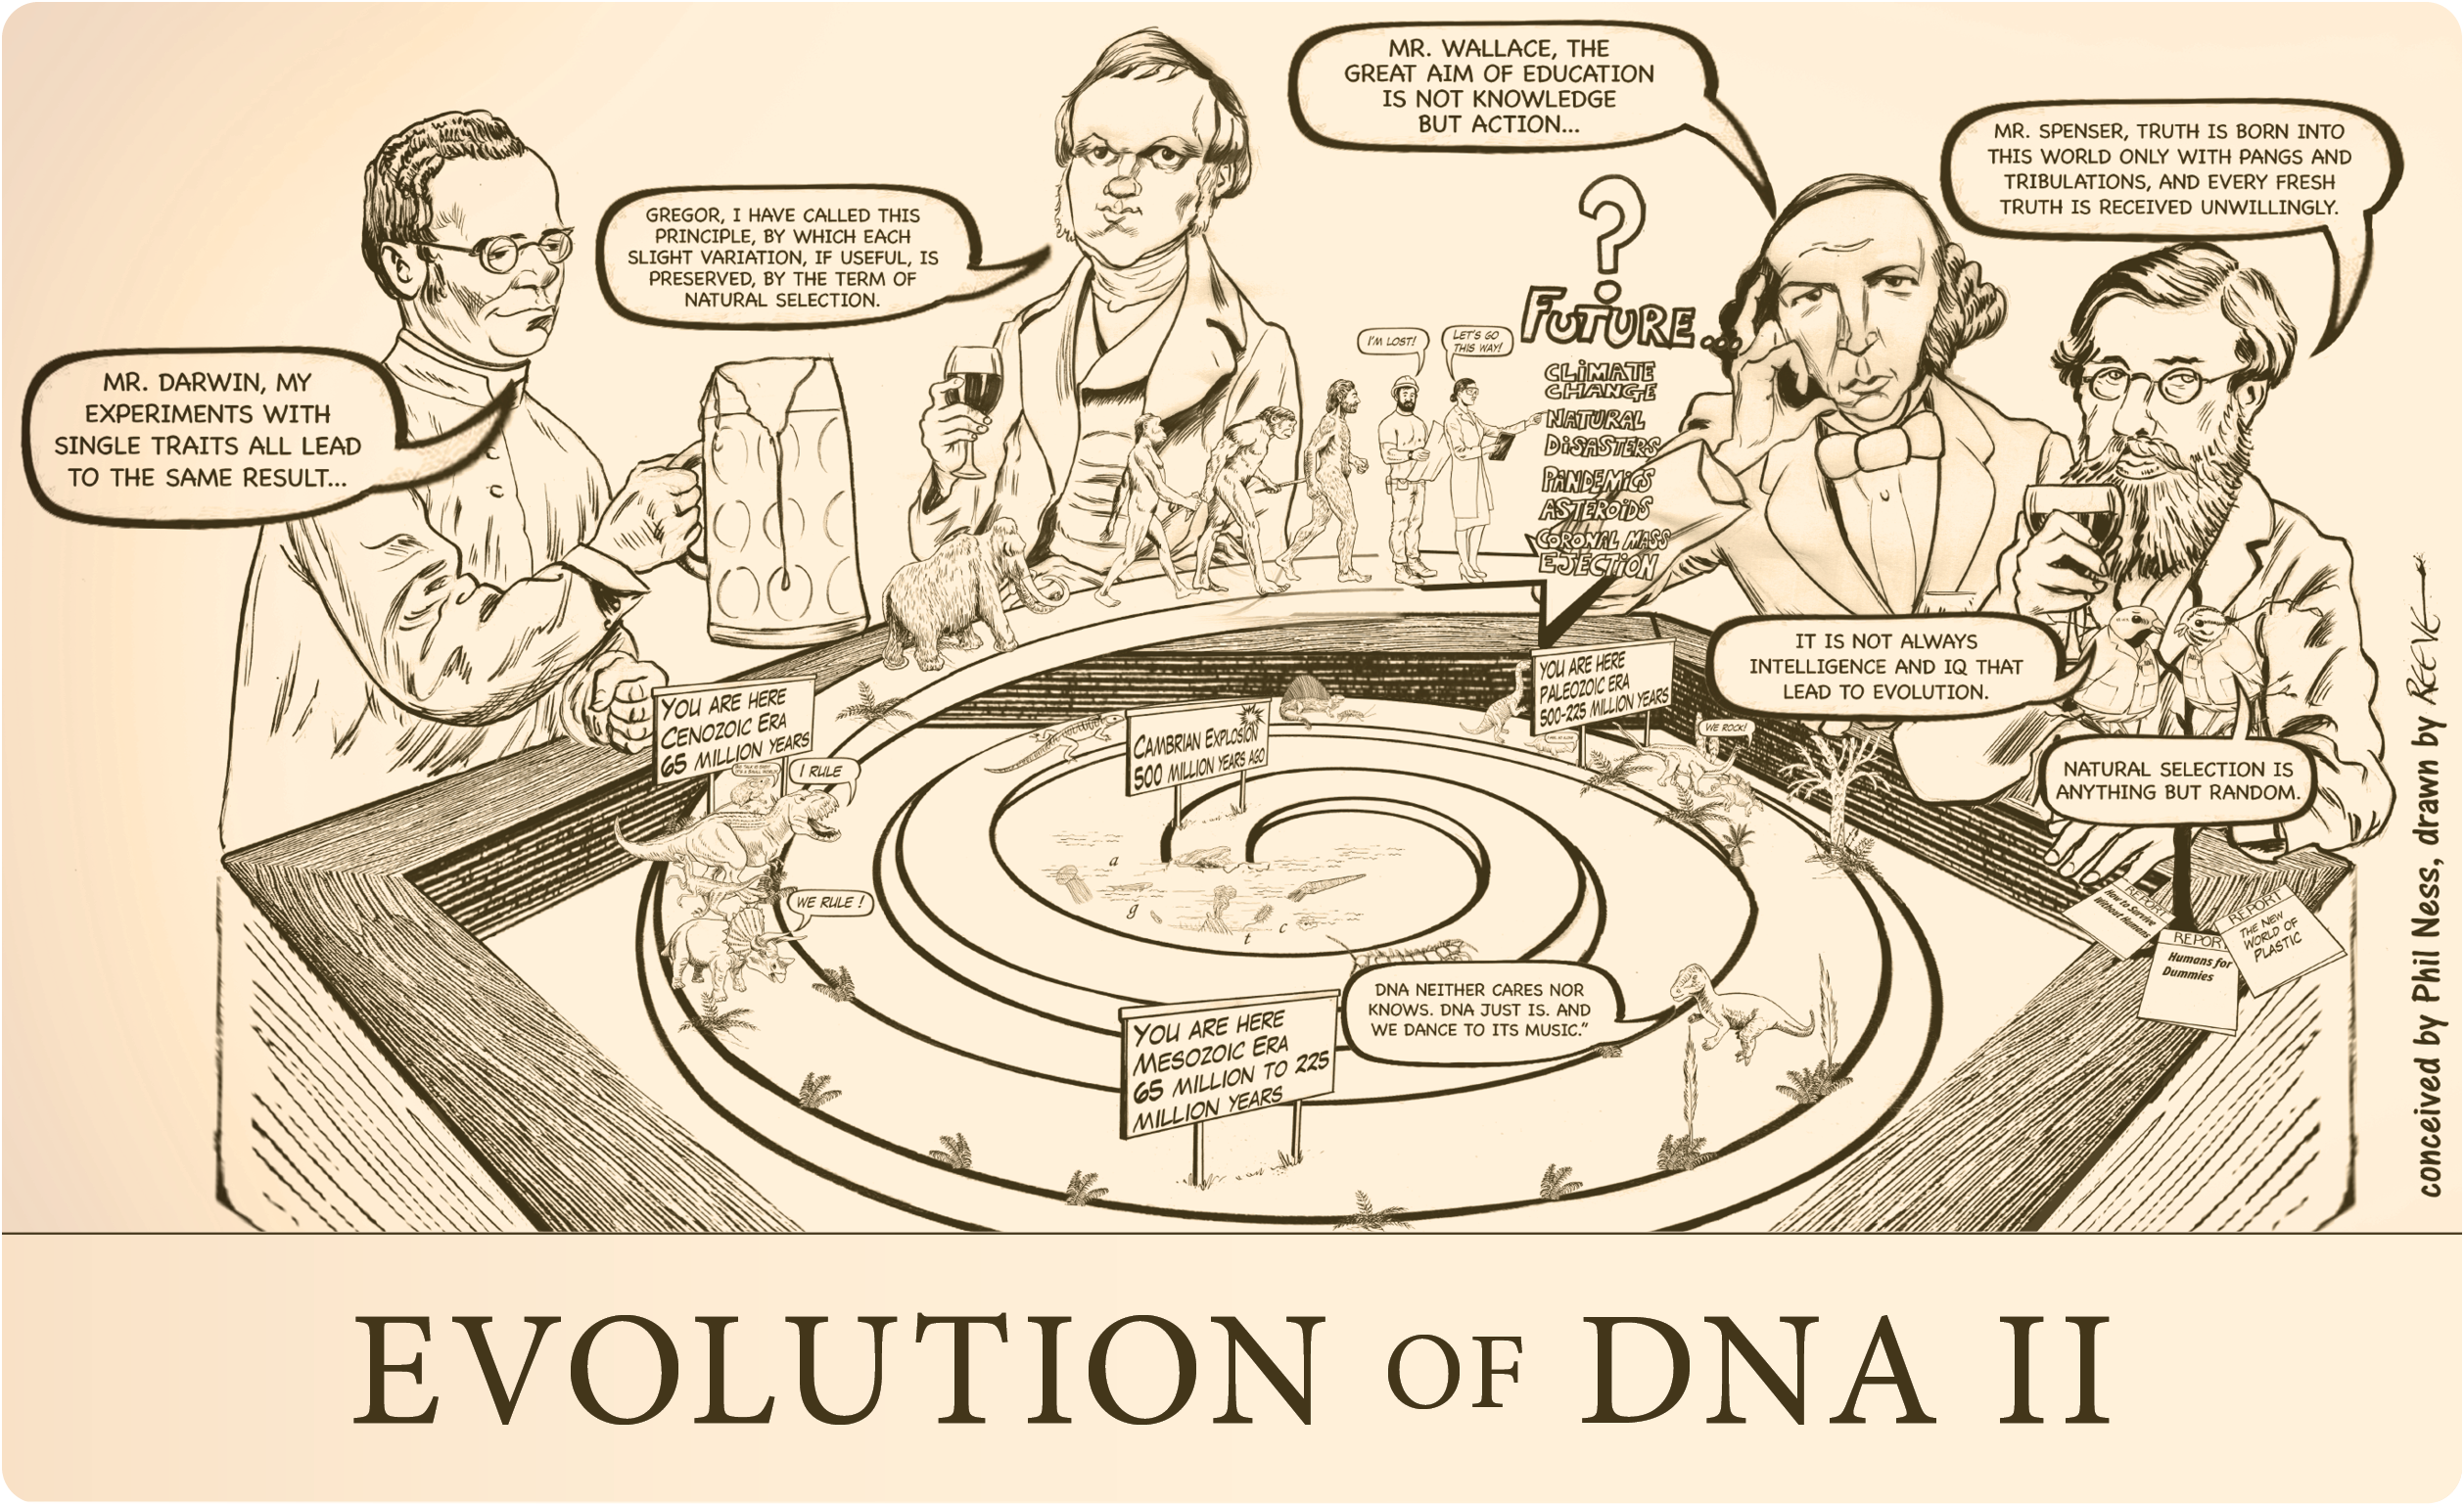 Cartoon: Evolution of DNA, 2023, conceived by Phil Ness, drawn by Reeve, 2023.